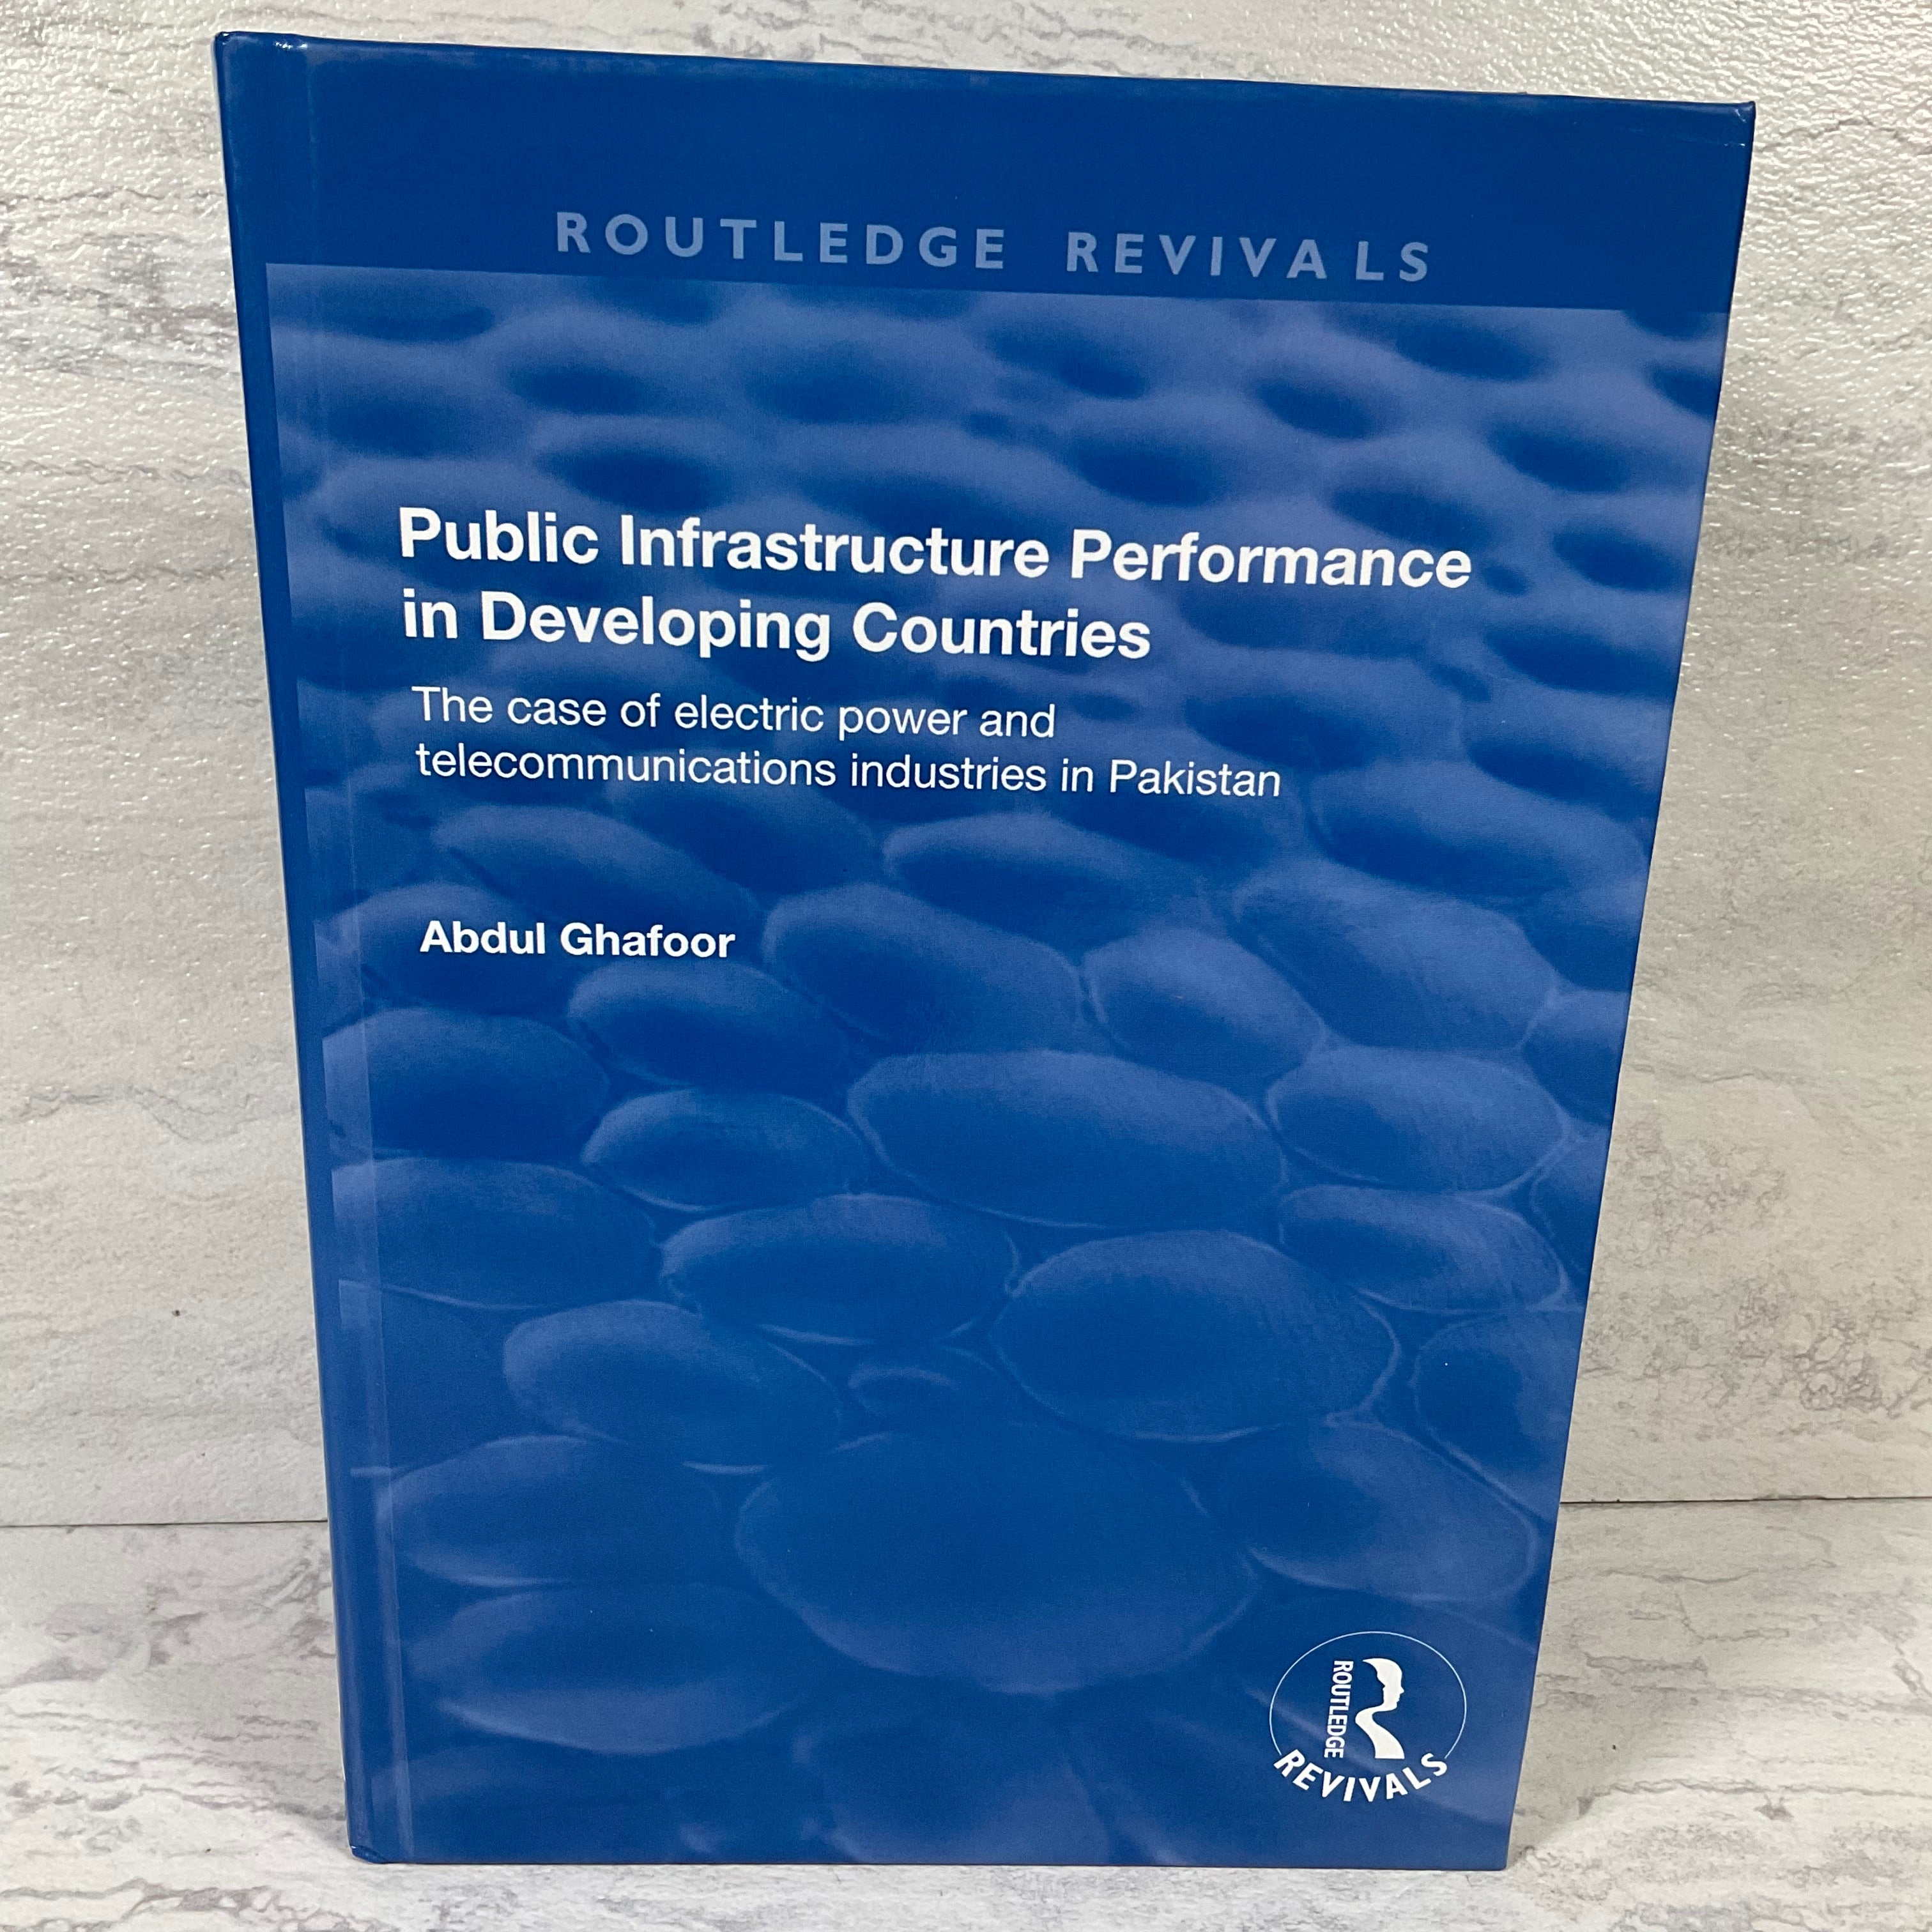 Public Infrastructure Performance in Developing Countries (Routledge Revivals) (7199642878190)